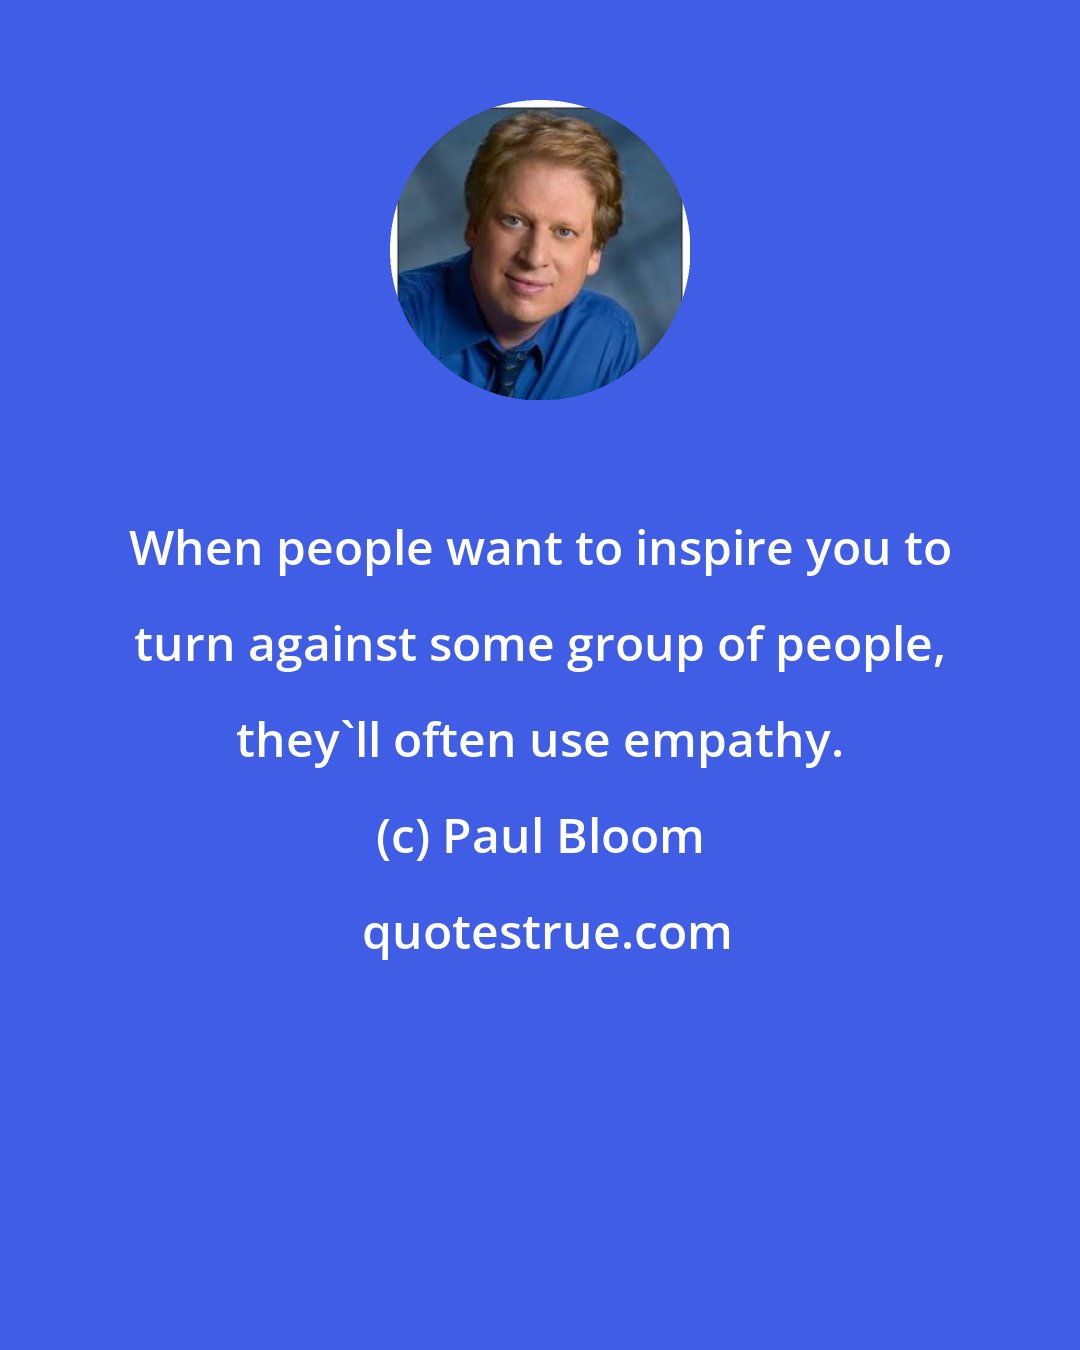 Paul Bloom: When people want to inspire you to turn against some group of people, they'll often use empathy.